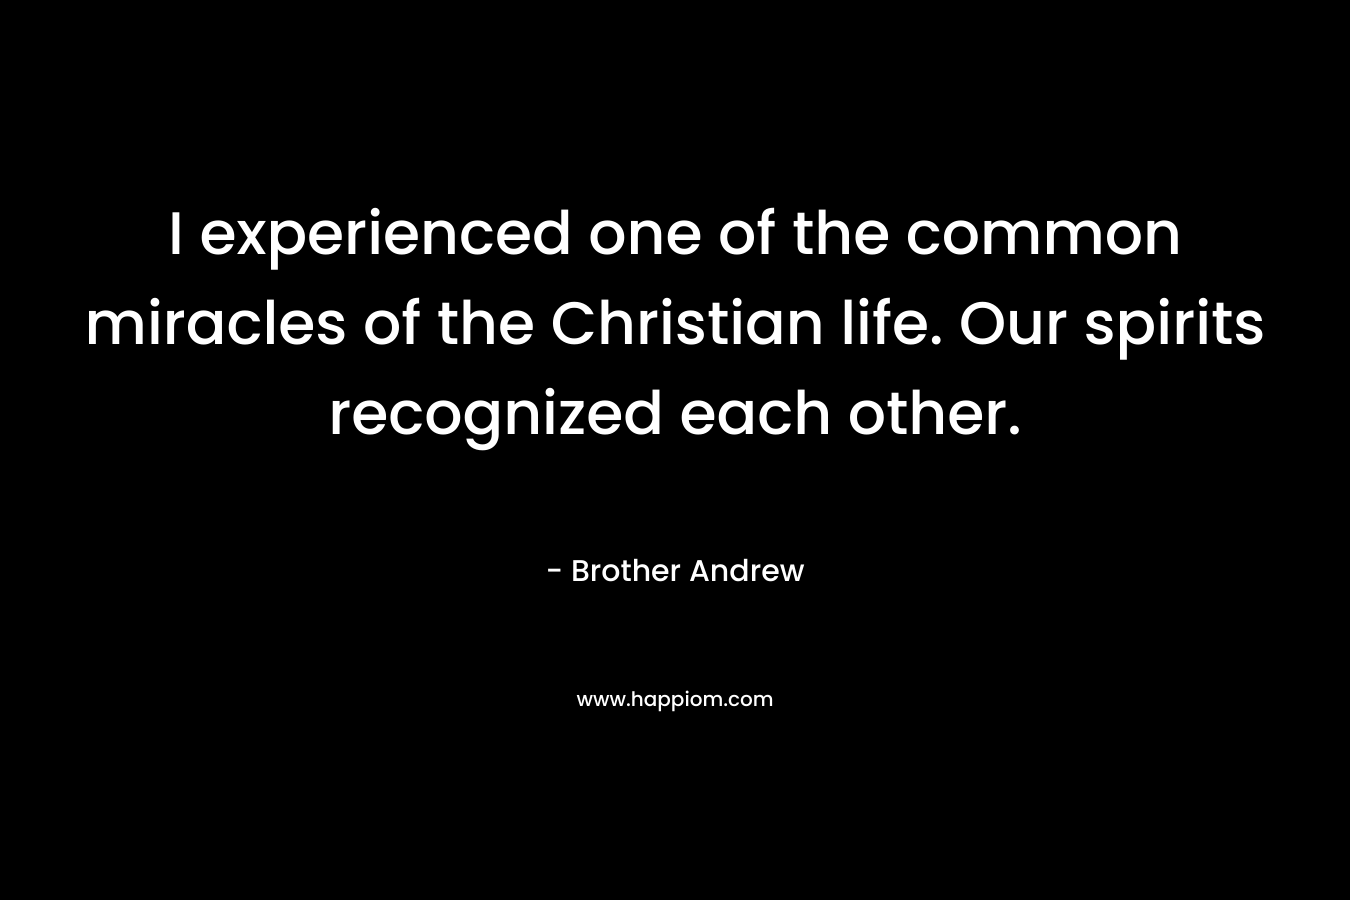 I experienced one of the common miracles of the Christian life. Our spirits recognized each other. – Brother Andrew